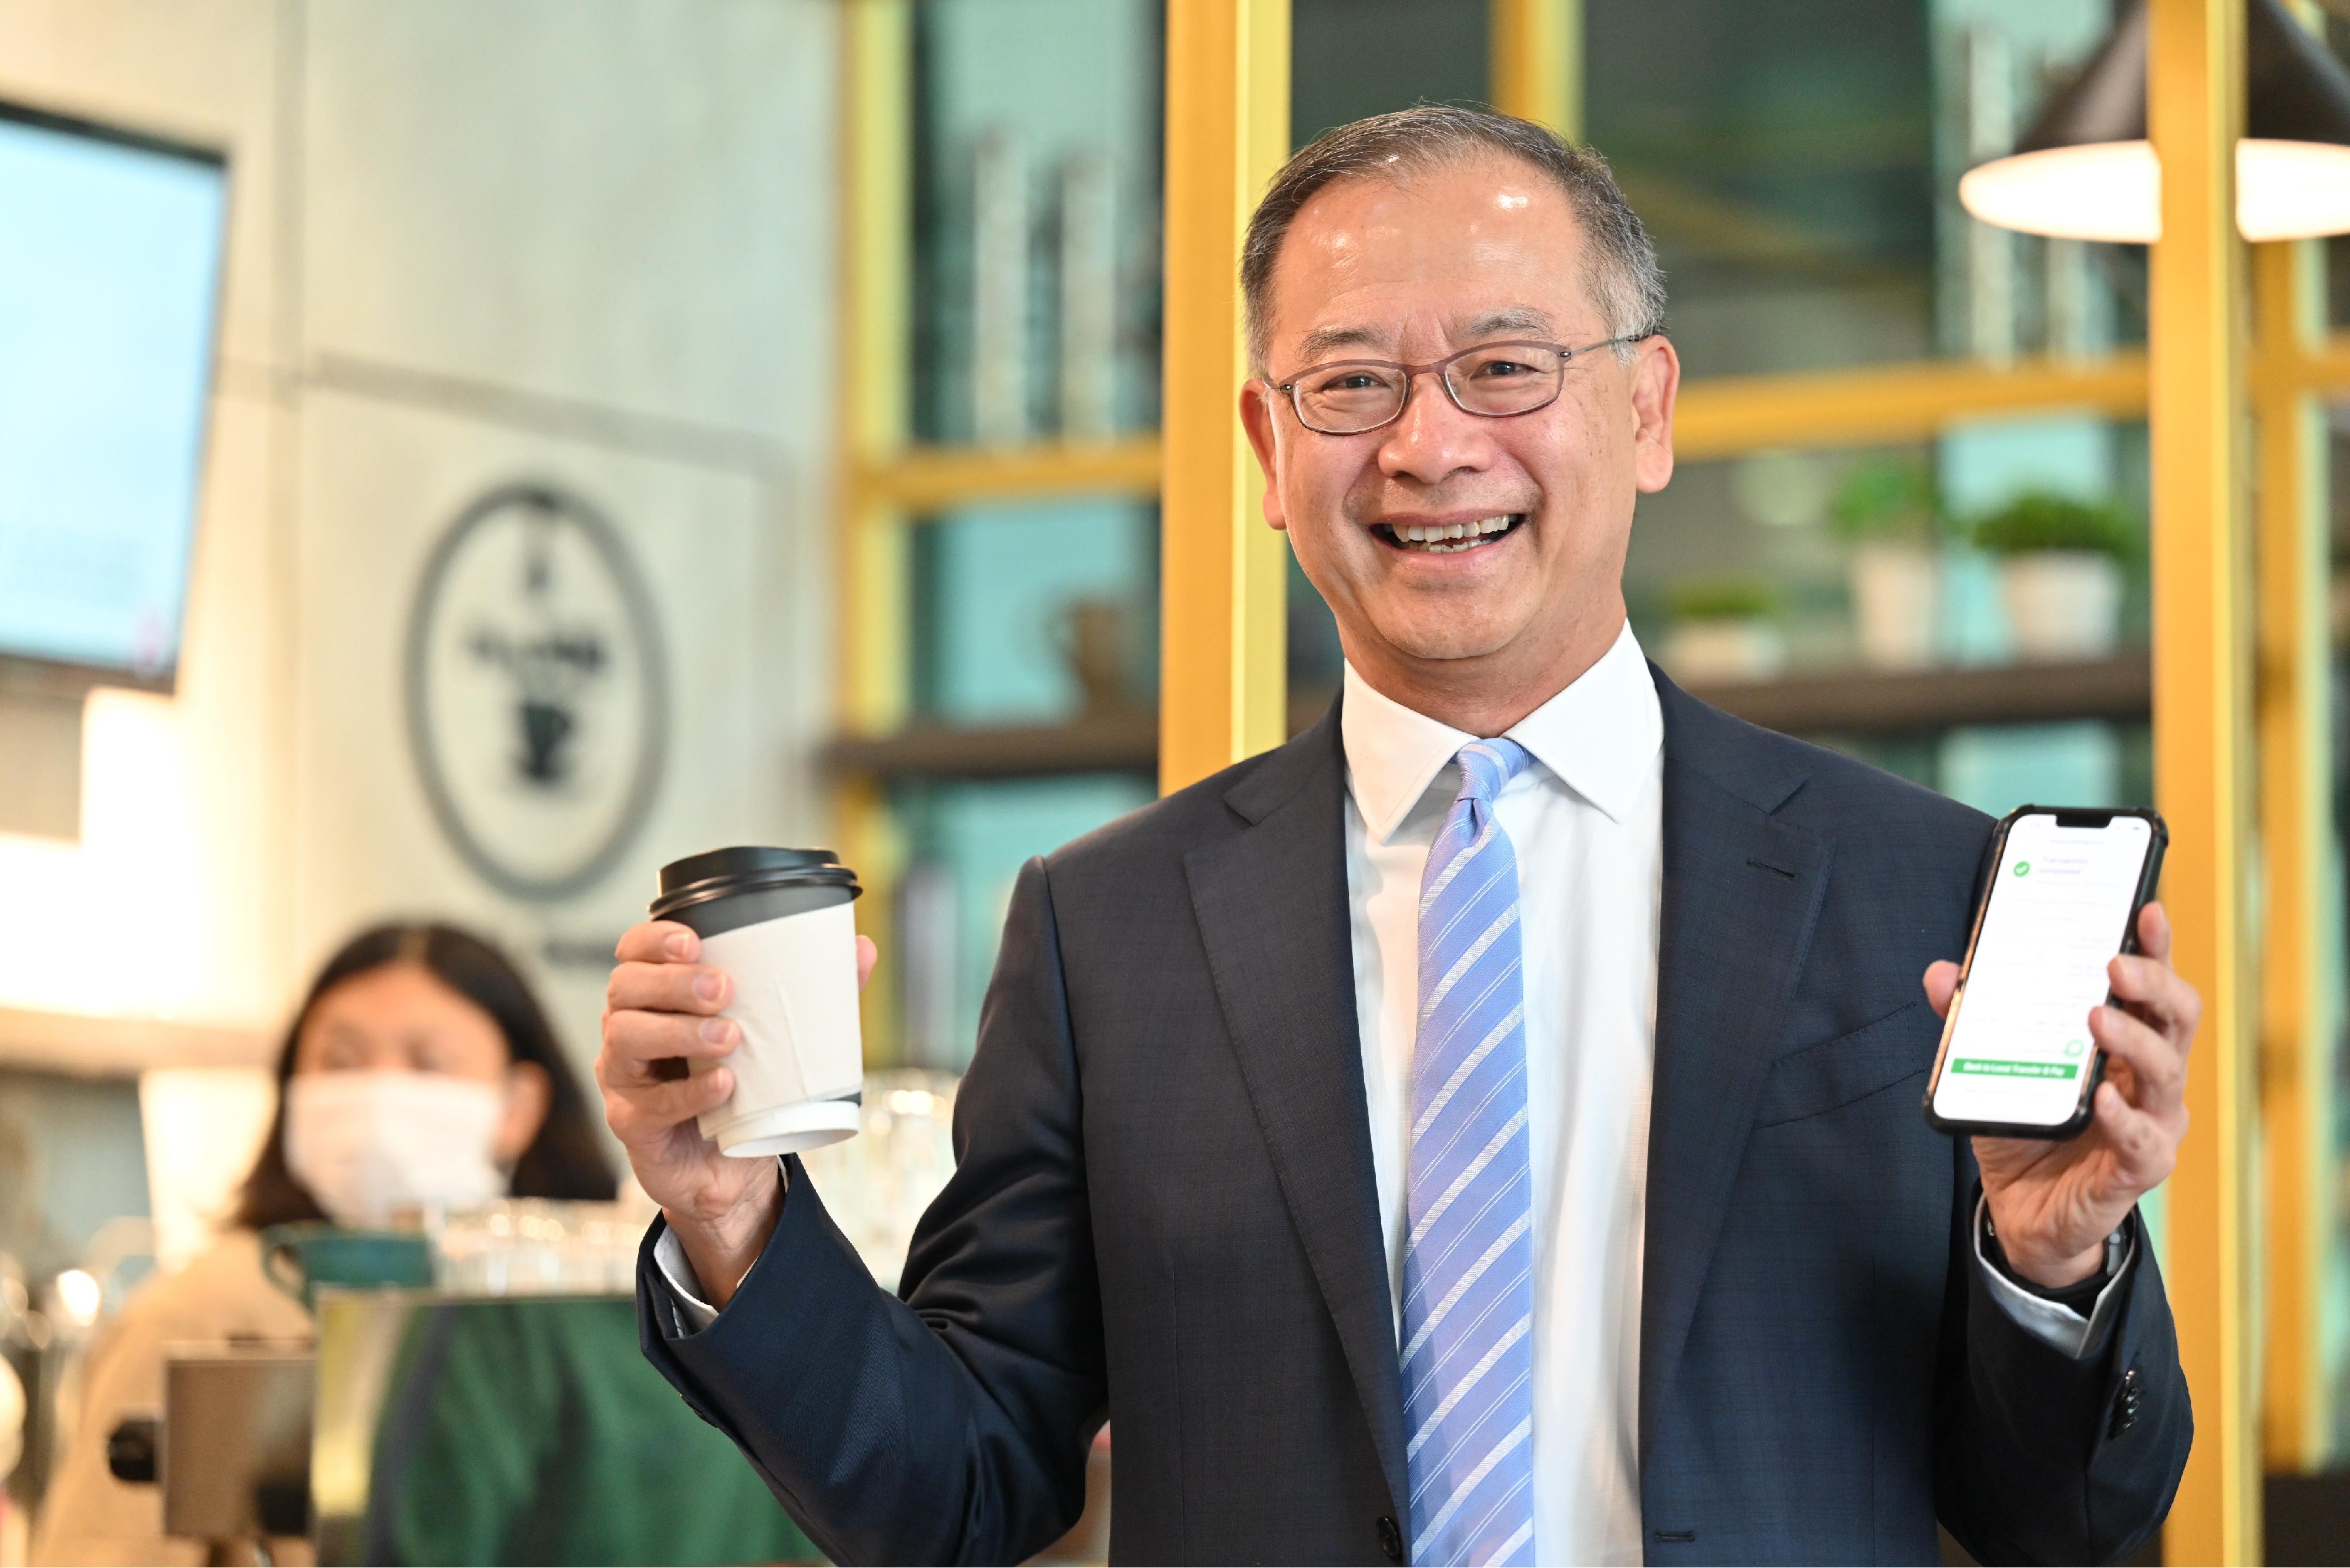 The Chief Executive of the Hong Kong Monetary Authority, Mr Eddie Yue, uses the Faster Payment System x PromptPay Link in a local café in Bangkok. 